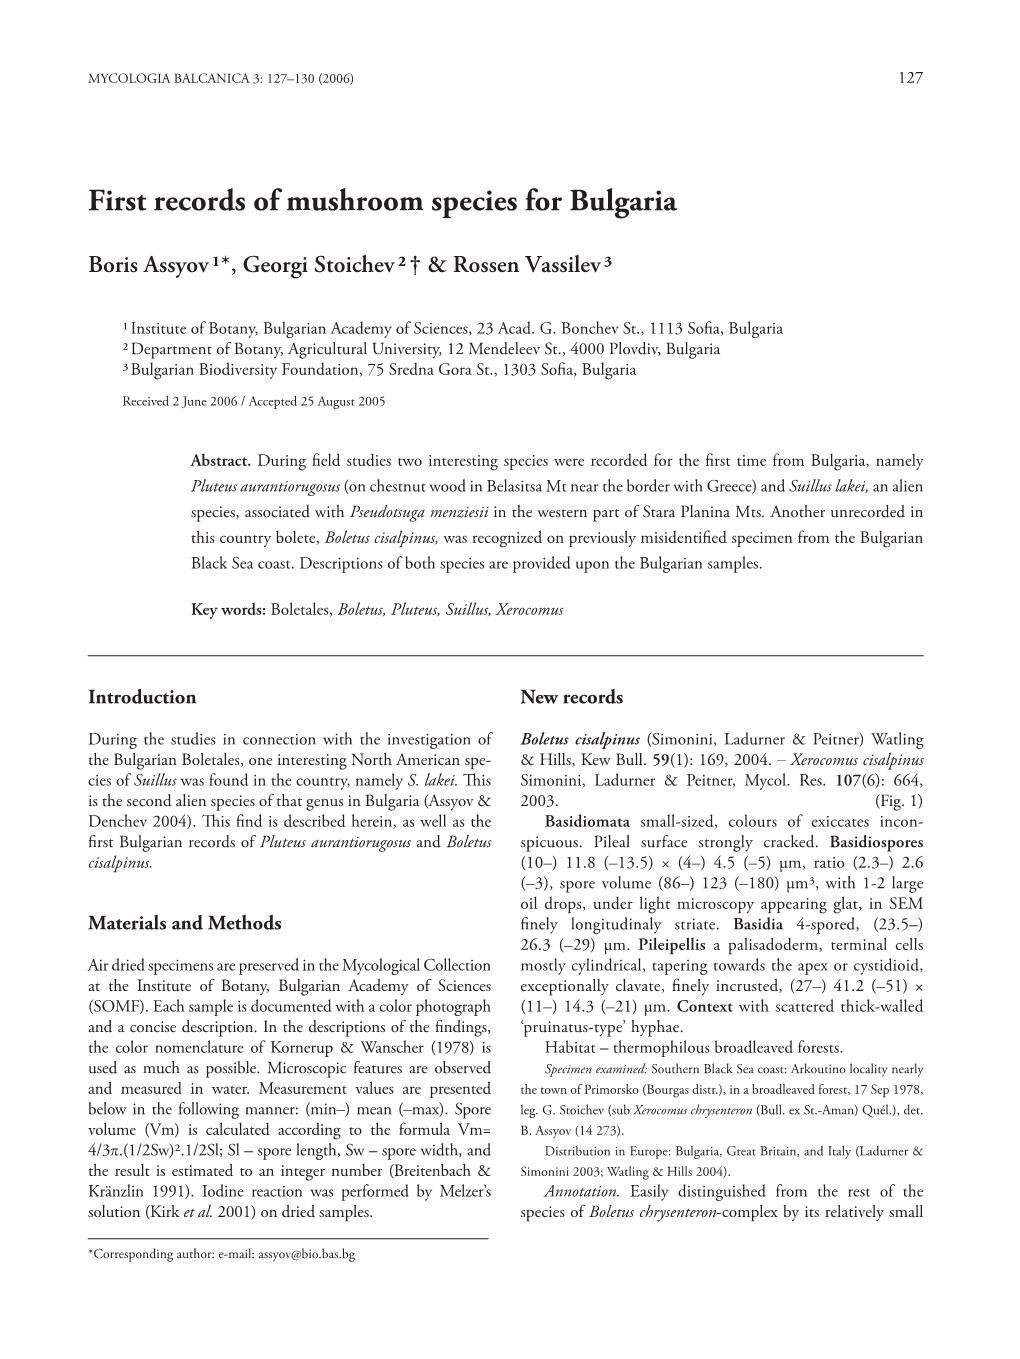 First Records of Mushroom Species for Bulgaria